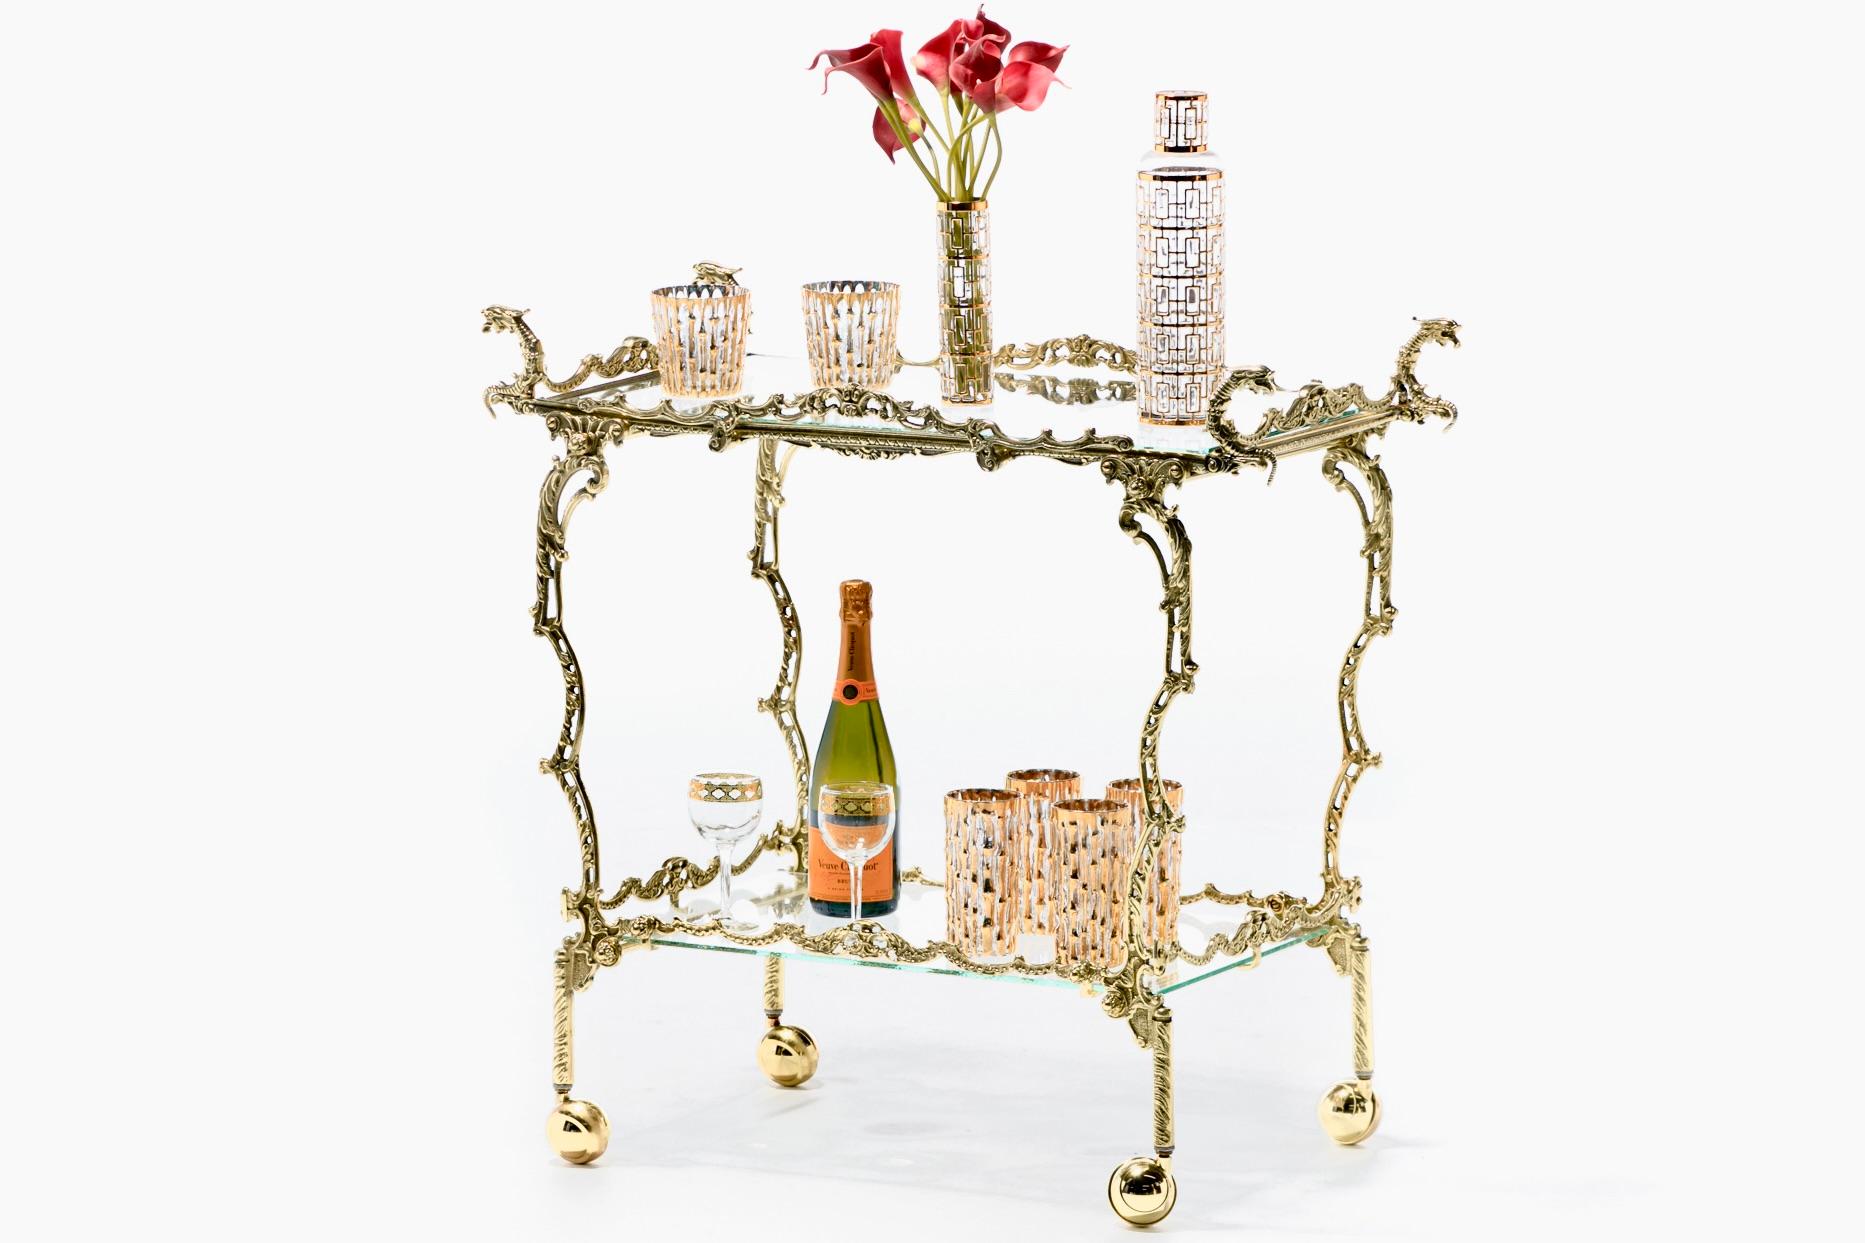 Italian Hollywood Regency Ornate Chinoiserie Polished Brass Bar Cart c. 1955 For Sale